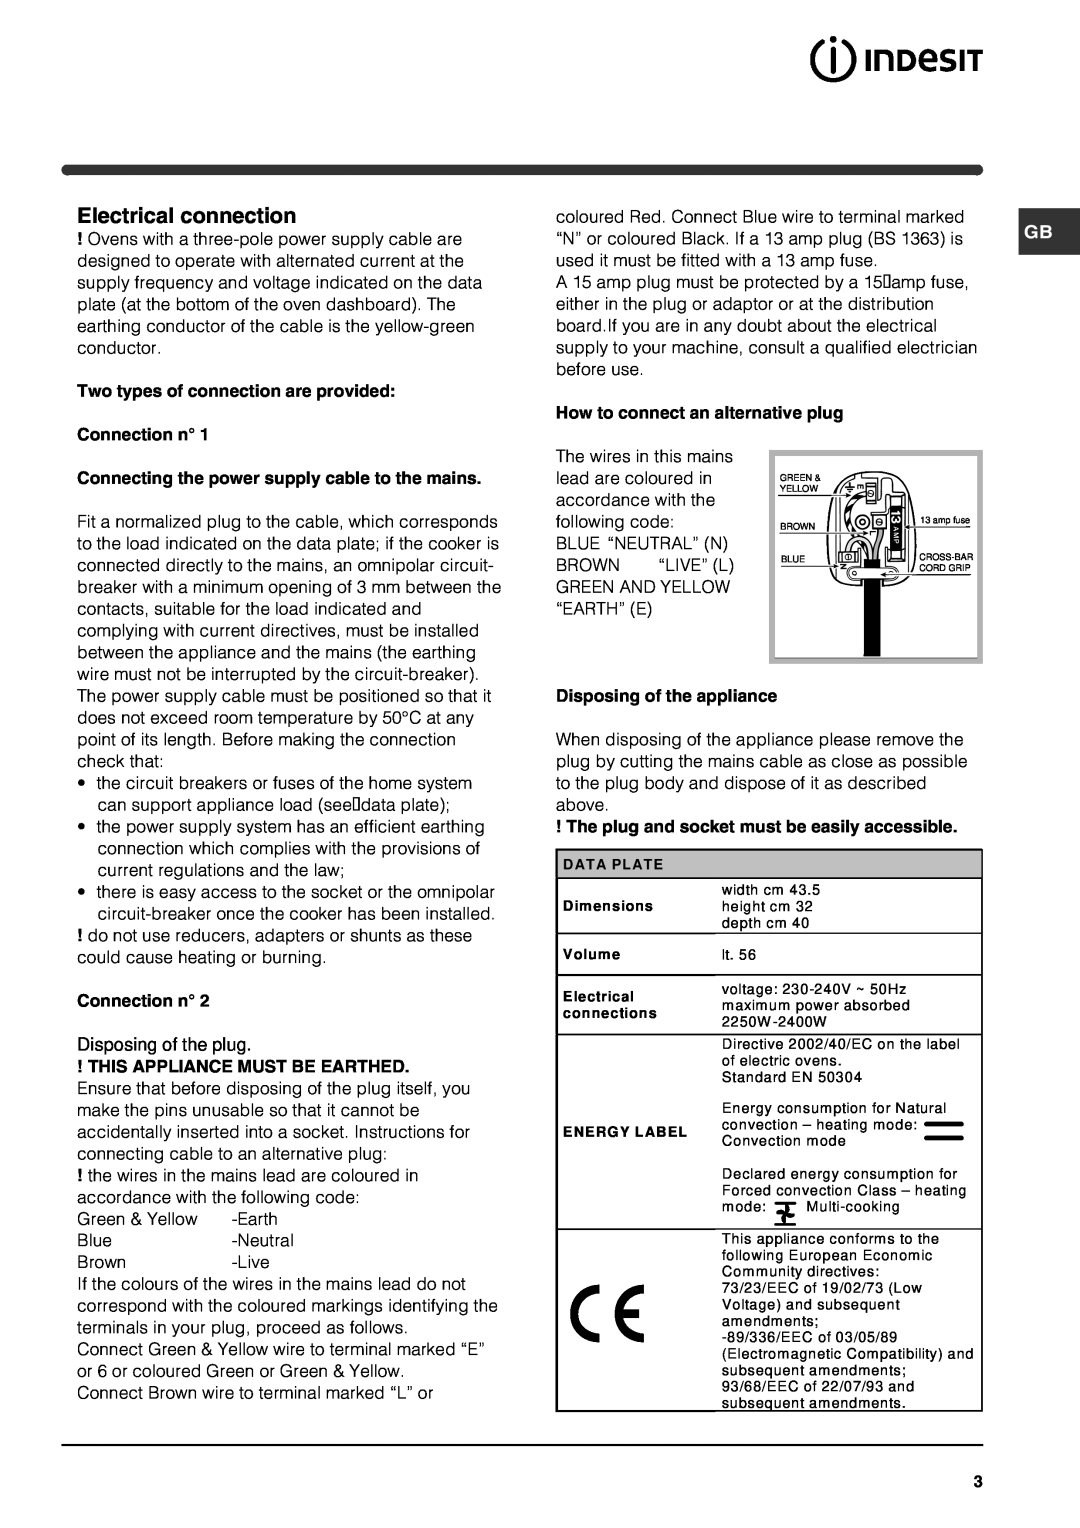 Indesit FIE 56 K.B GB operating instructions Electrical connection 